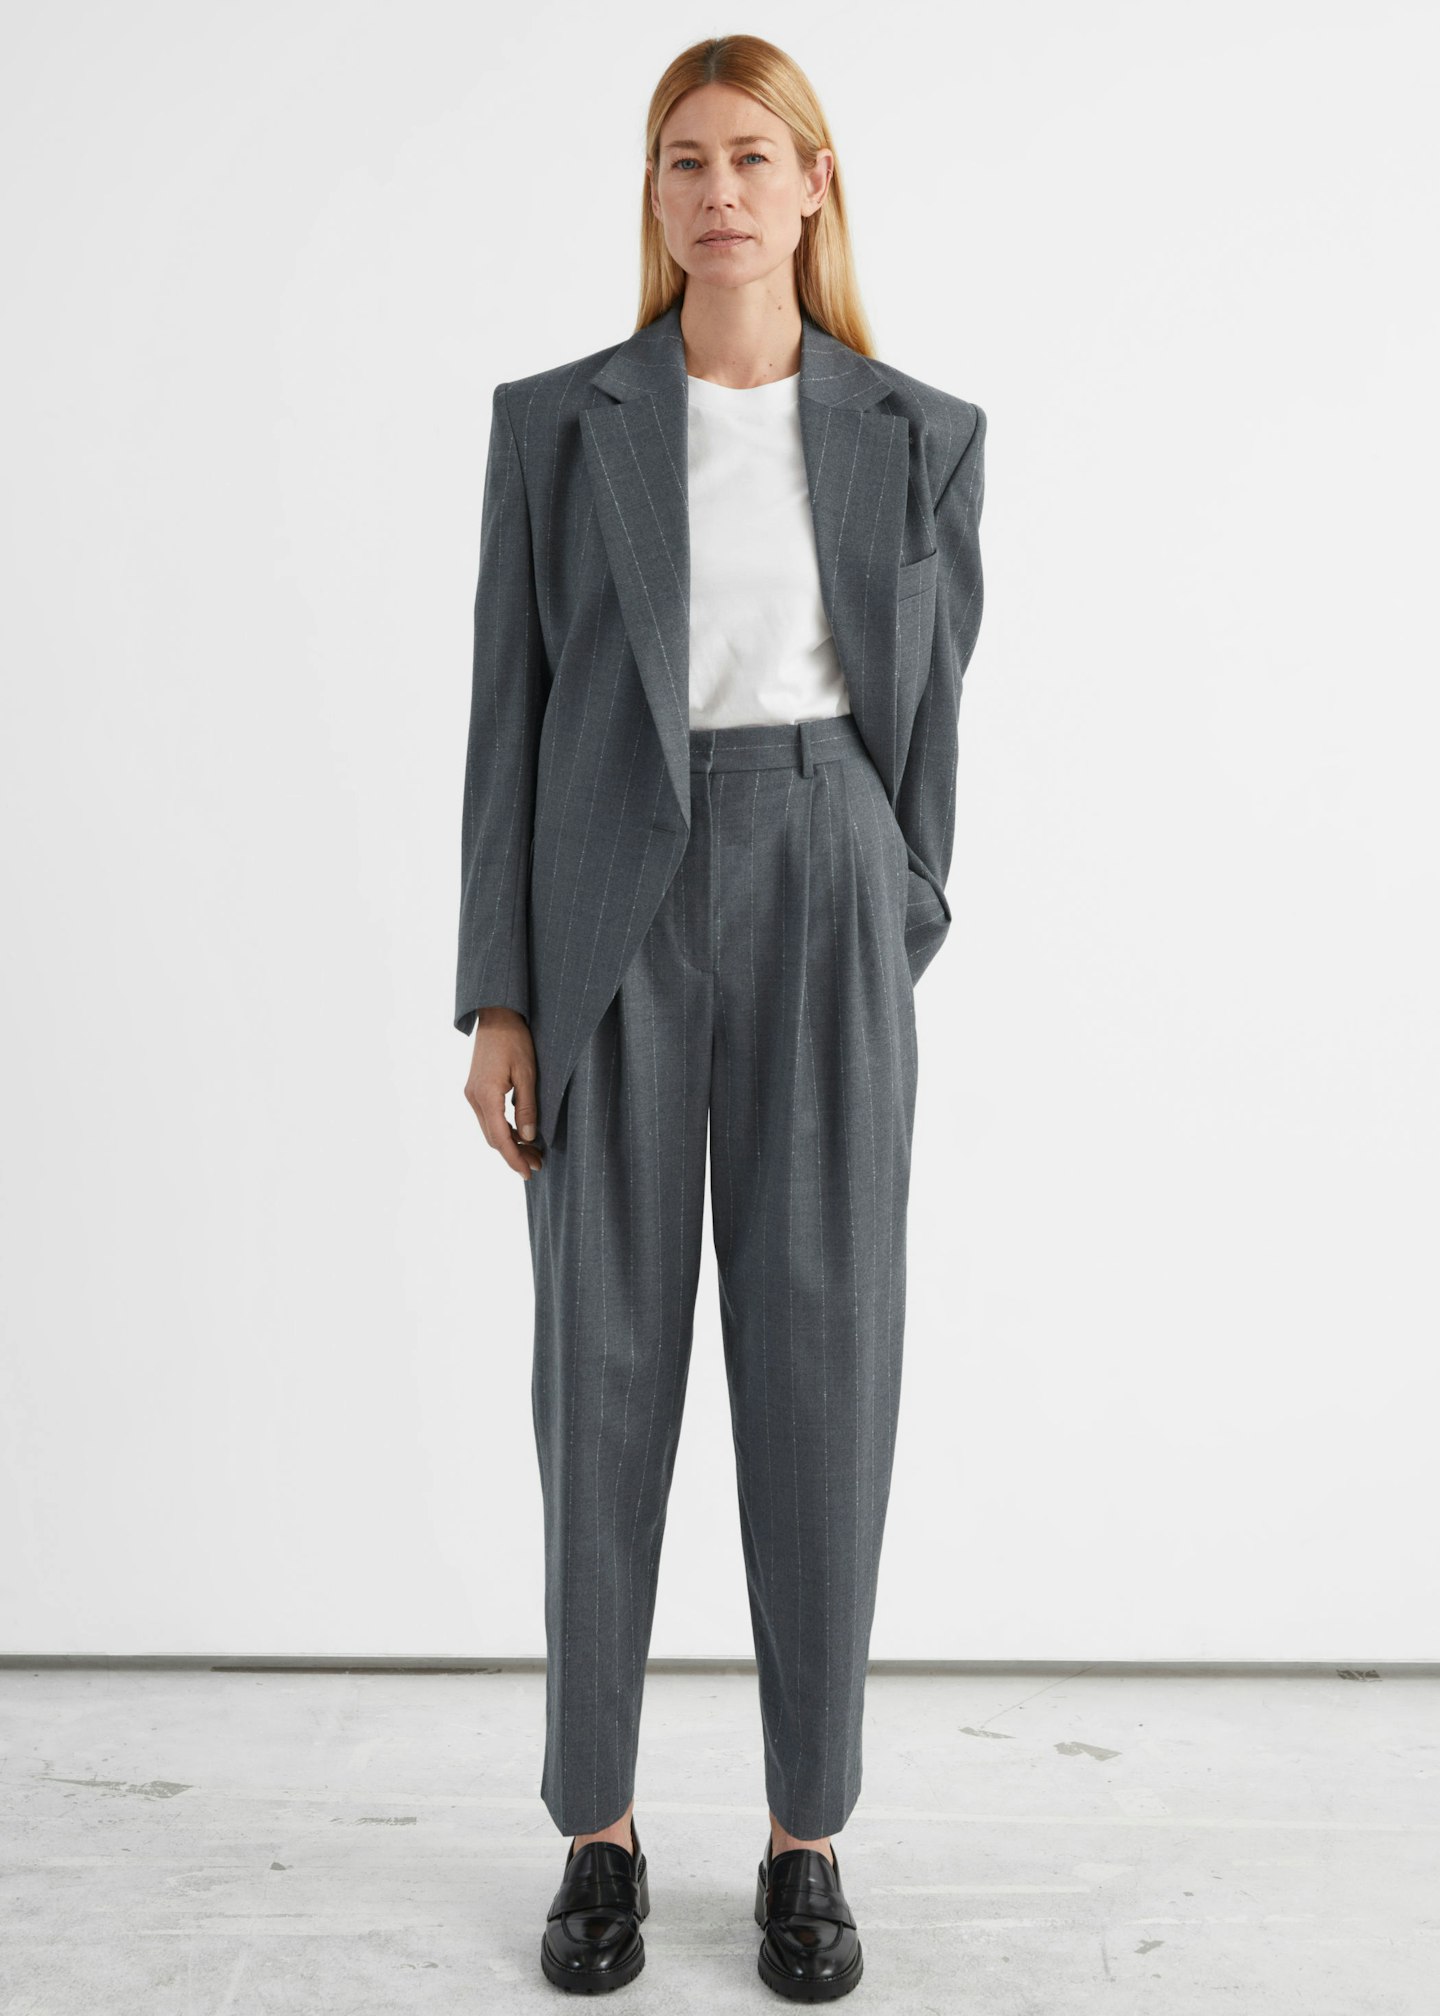 & Other Stories, Tailored Tapered Pinstripe Wool Trousers, £120